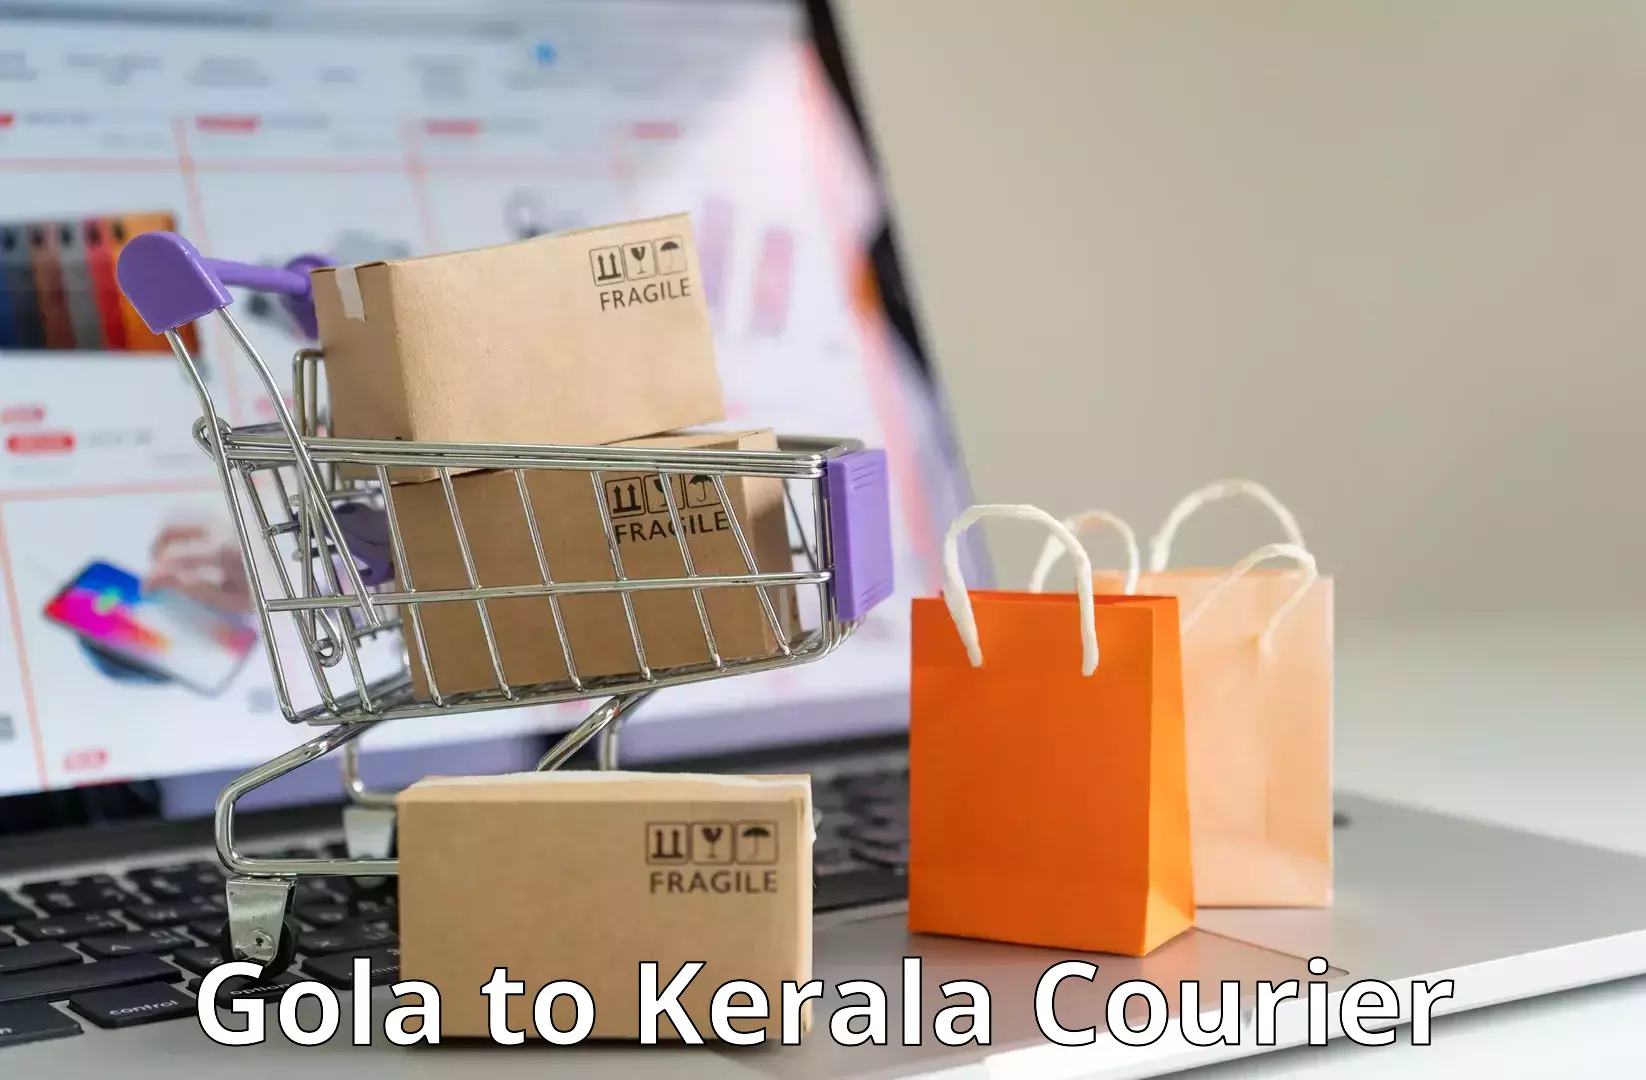 Express delivery capabilities Gola to Shoranur